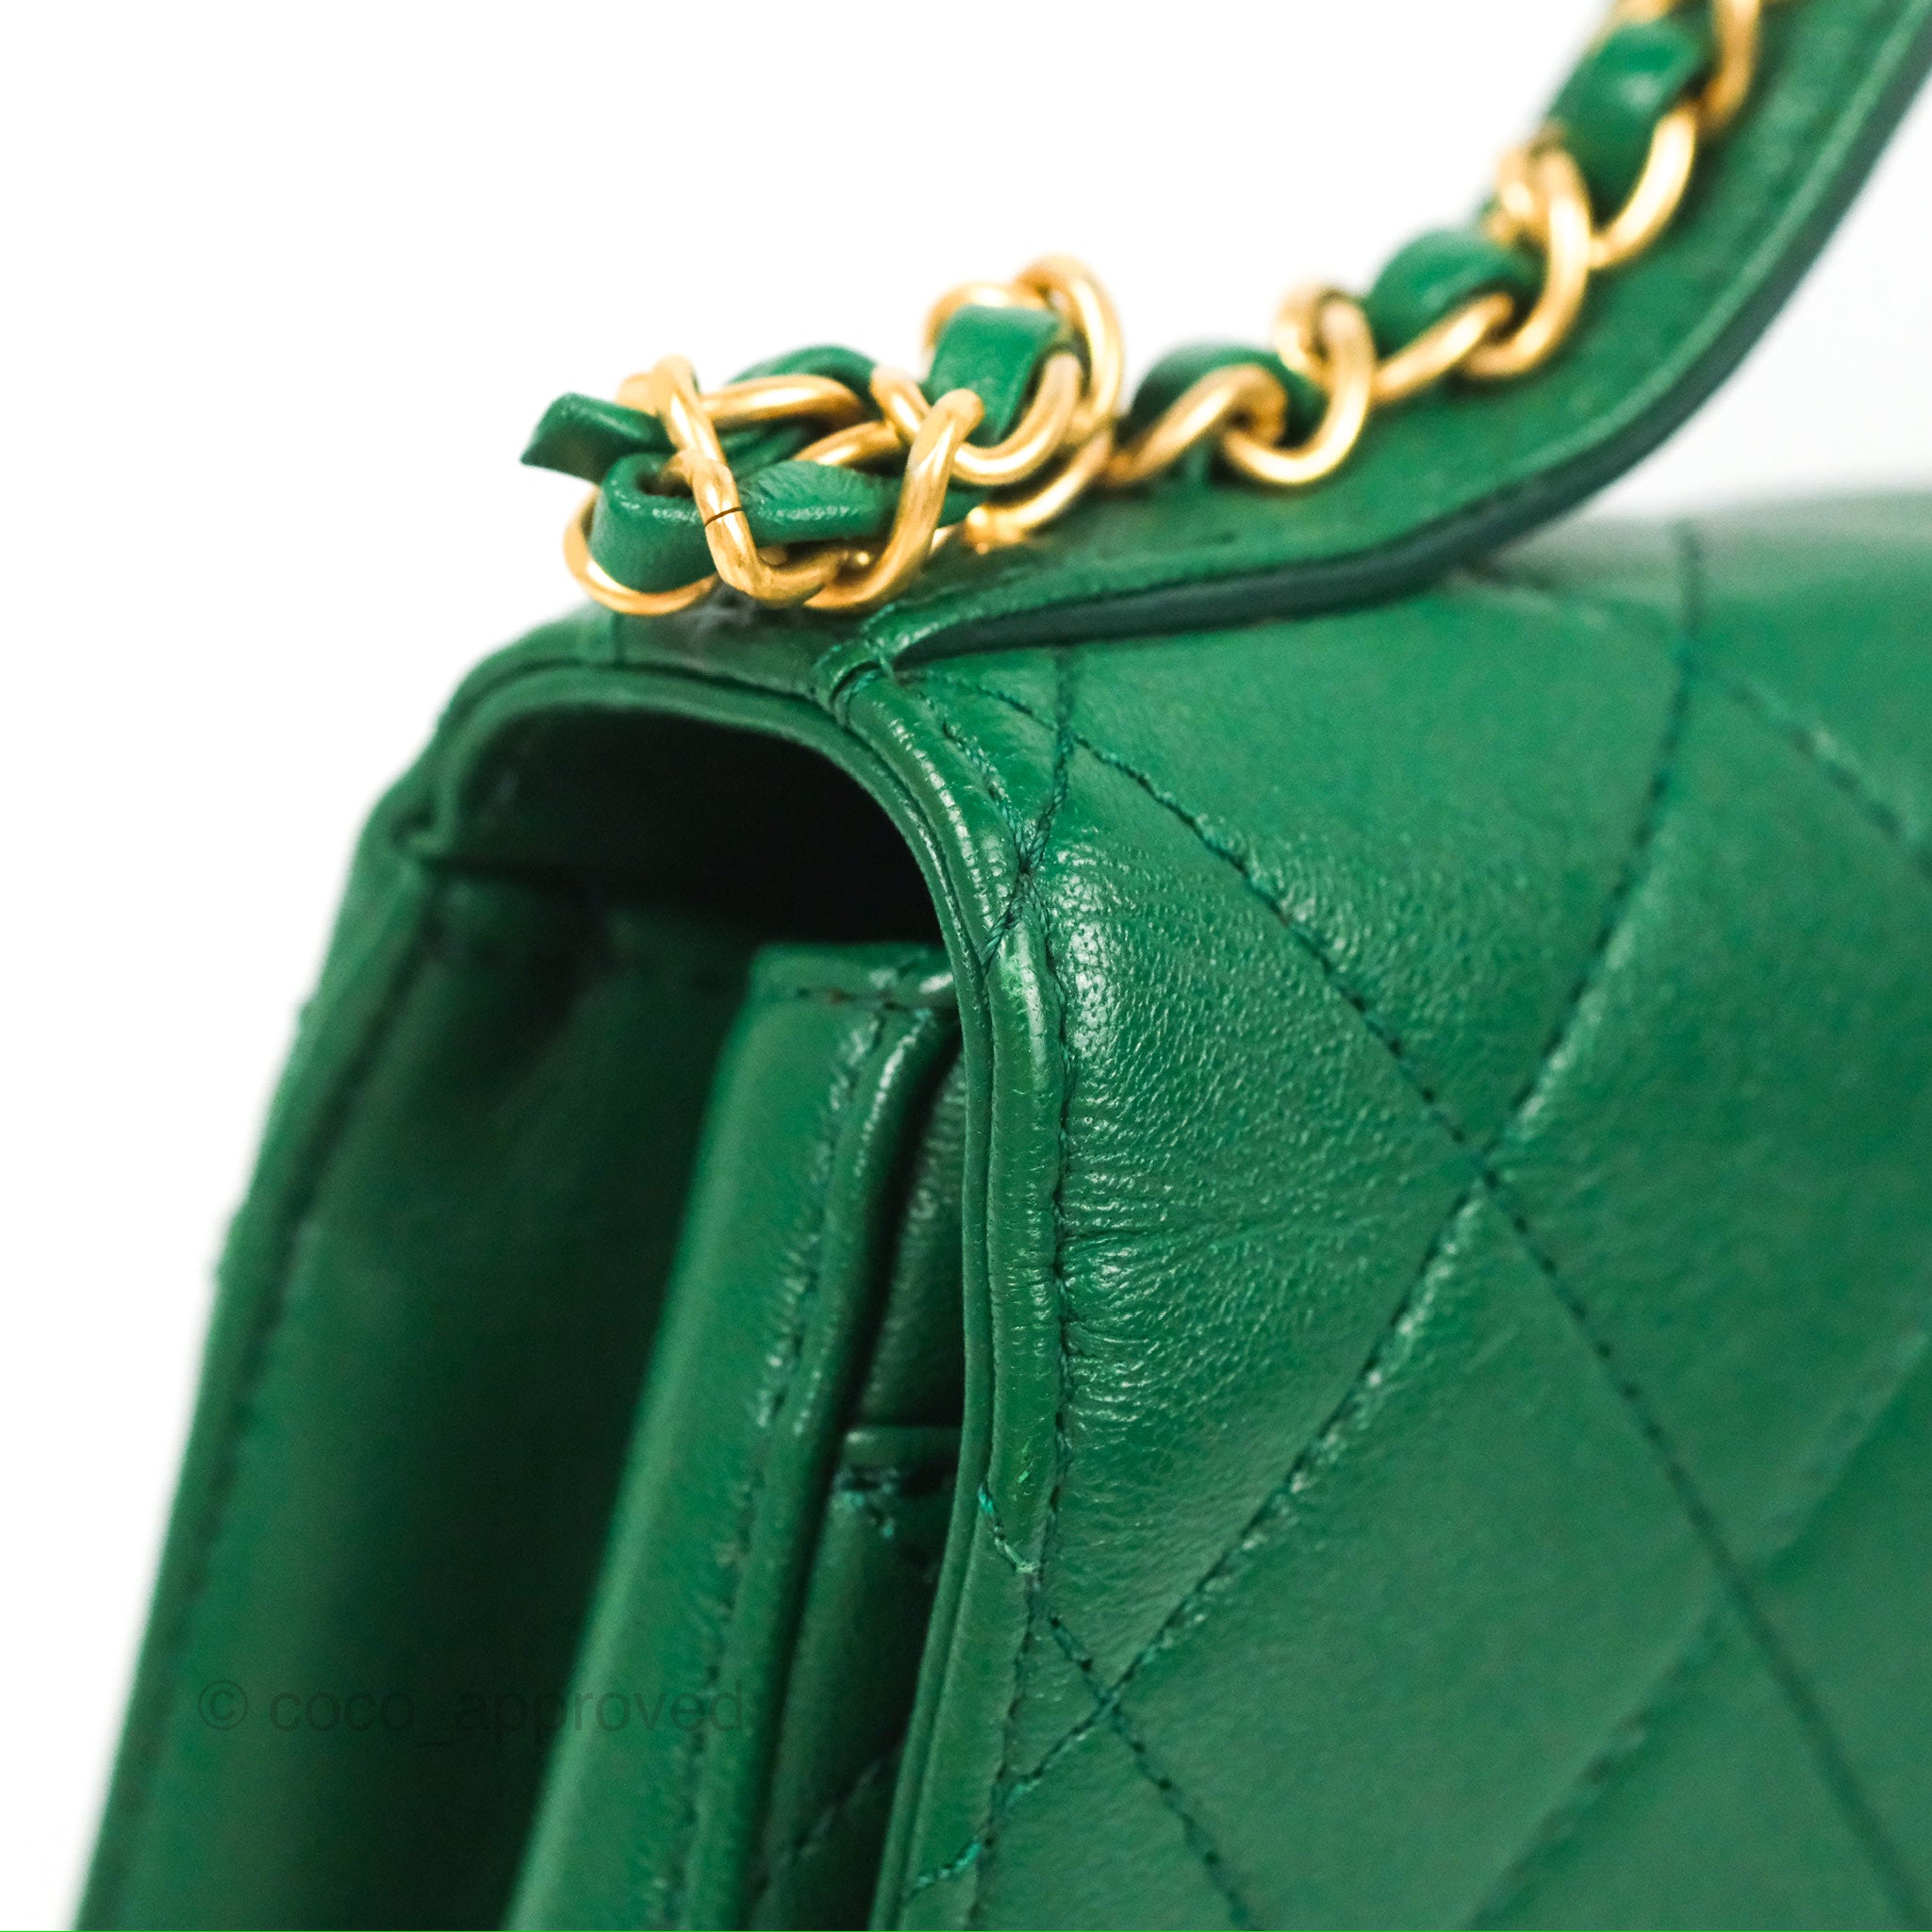 Chanel Chain Infinity Top Handle Bag Green Lambskin Aged Gold Hardware